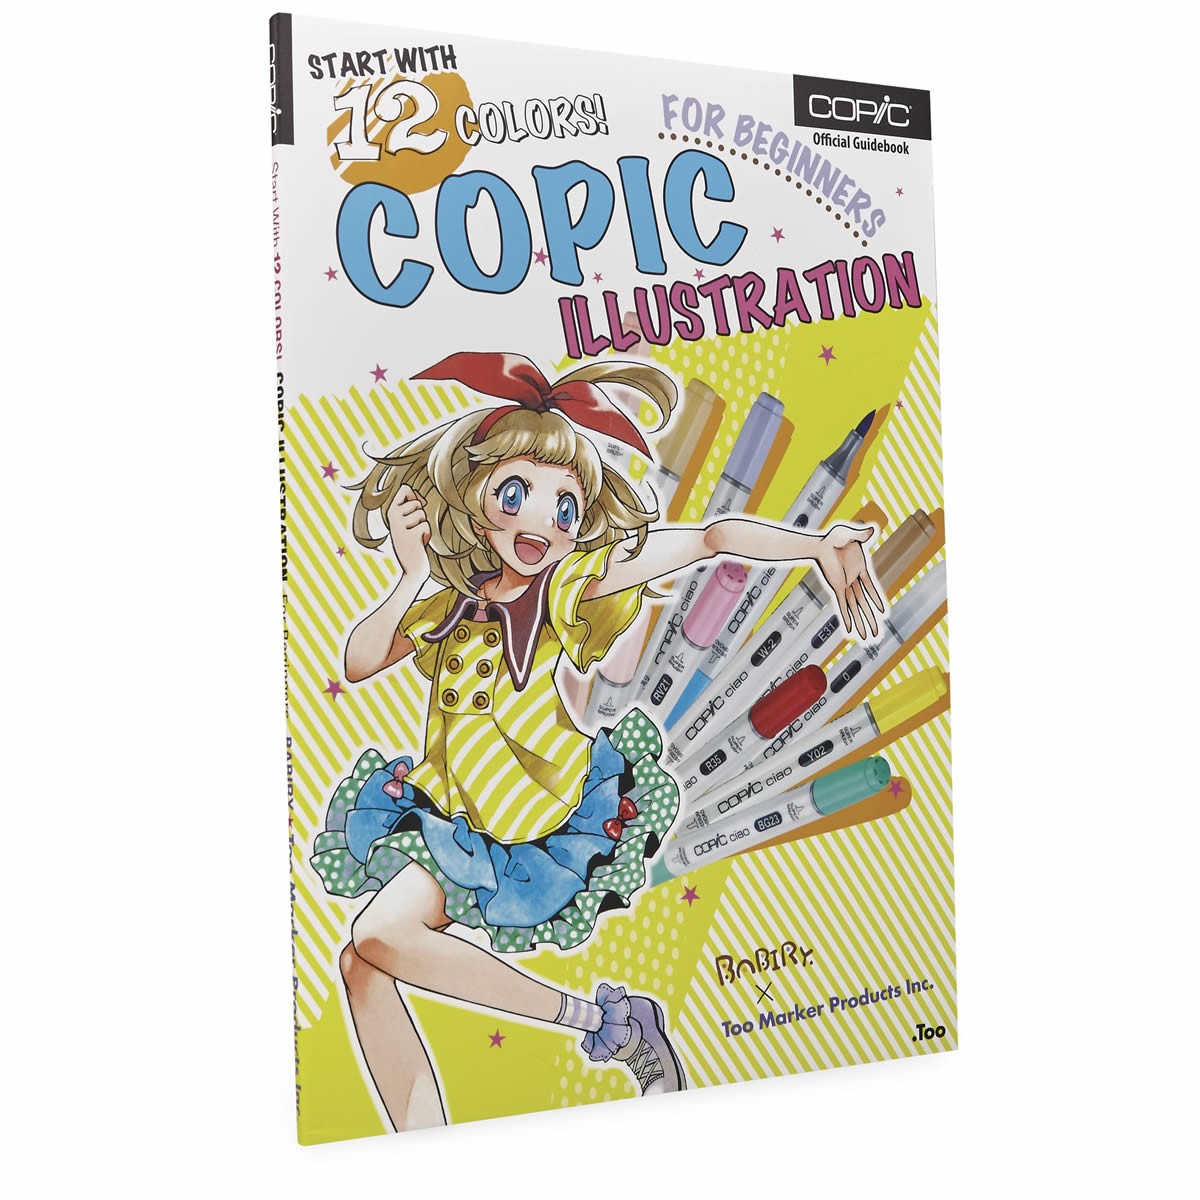 Copic Illustration for Beginners